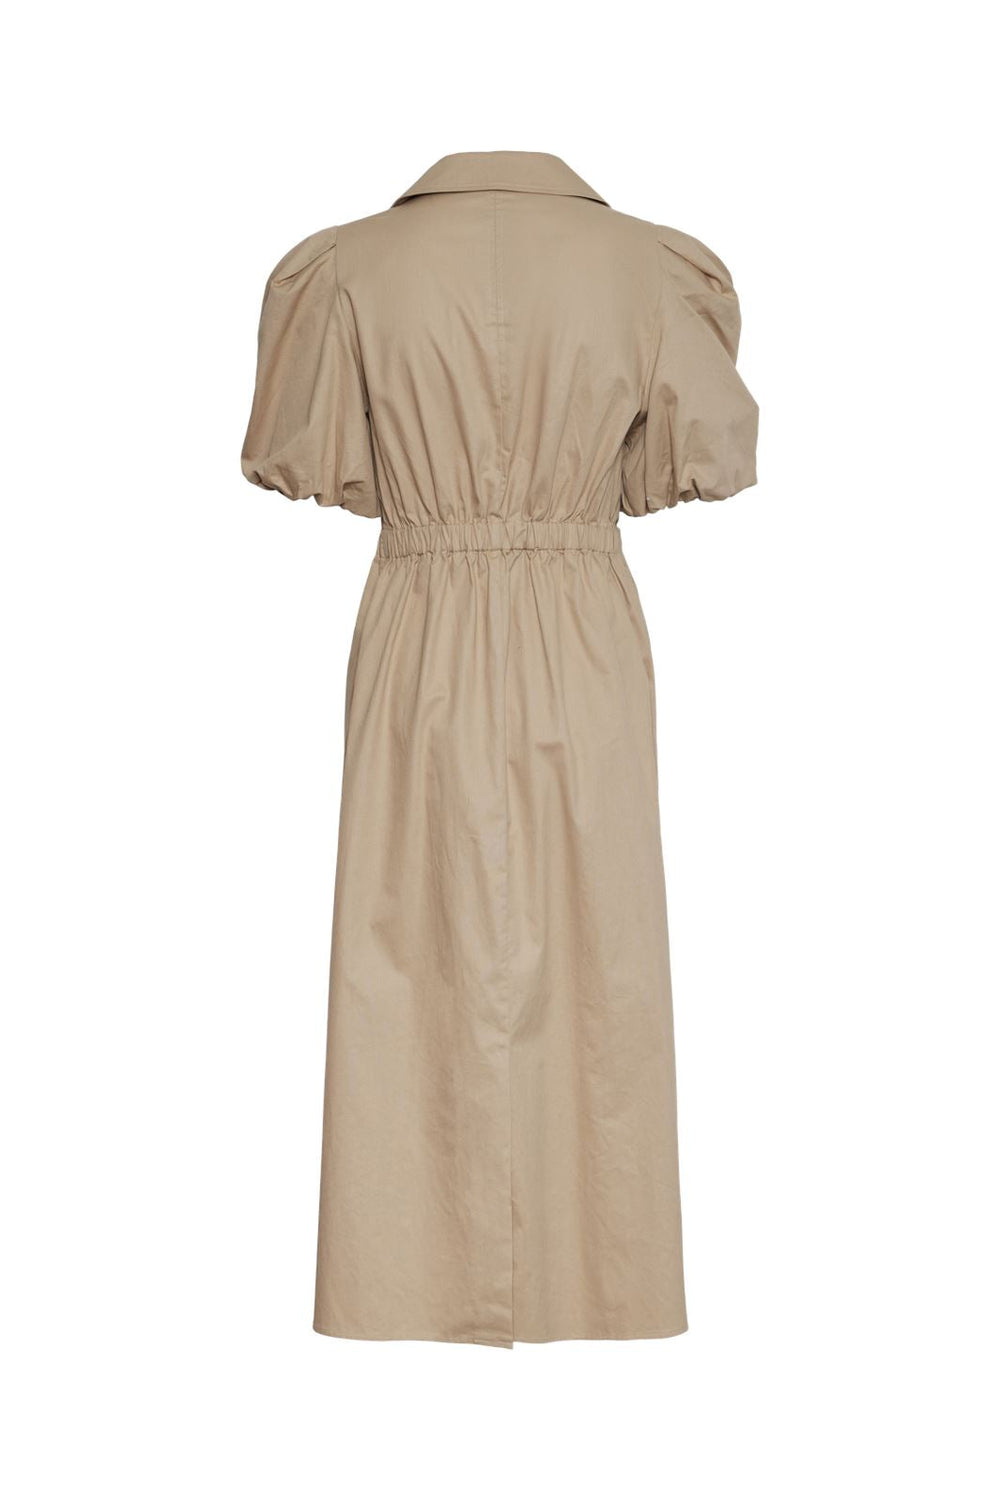 Y.A.S - Yastrench 2/4 Long Dress - 4463127 Ginger Root